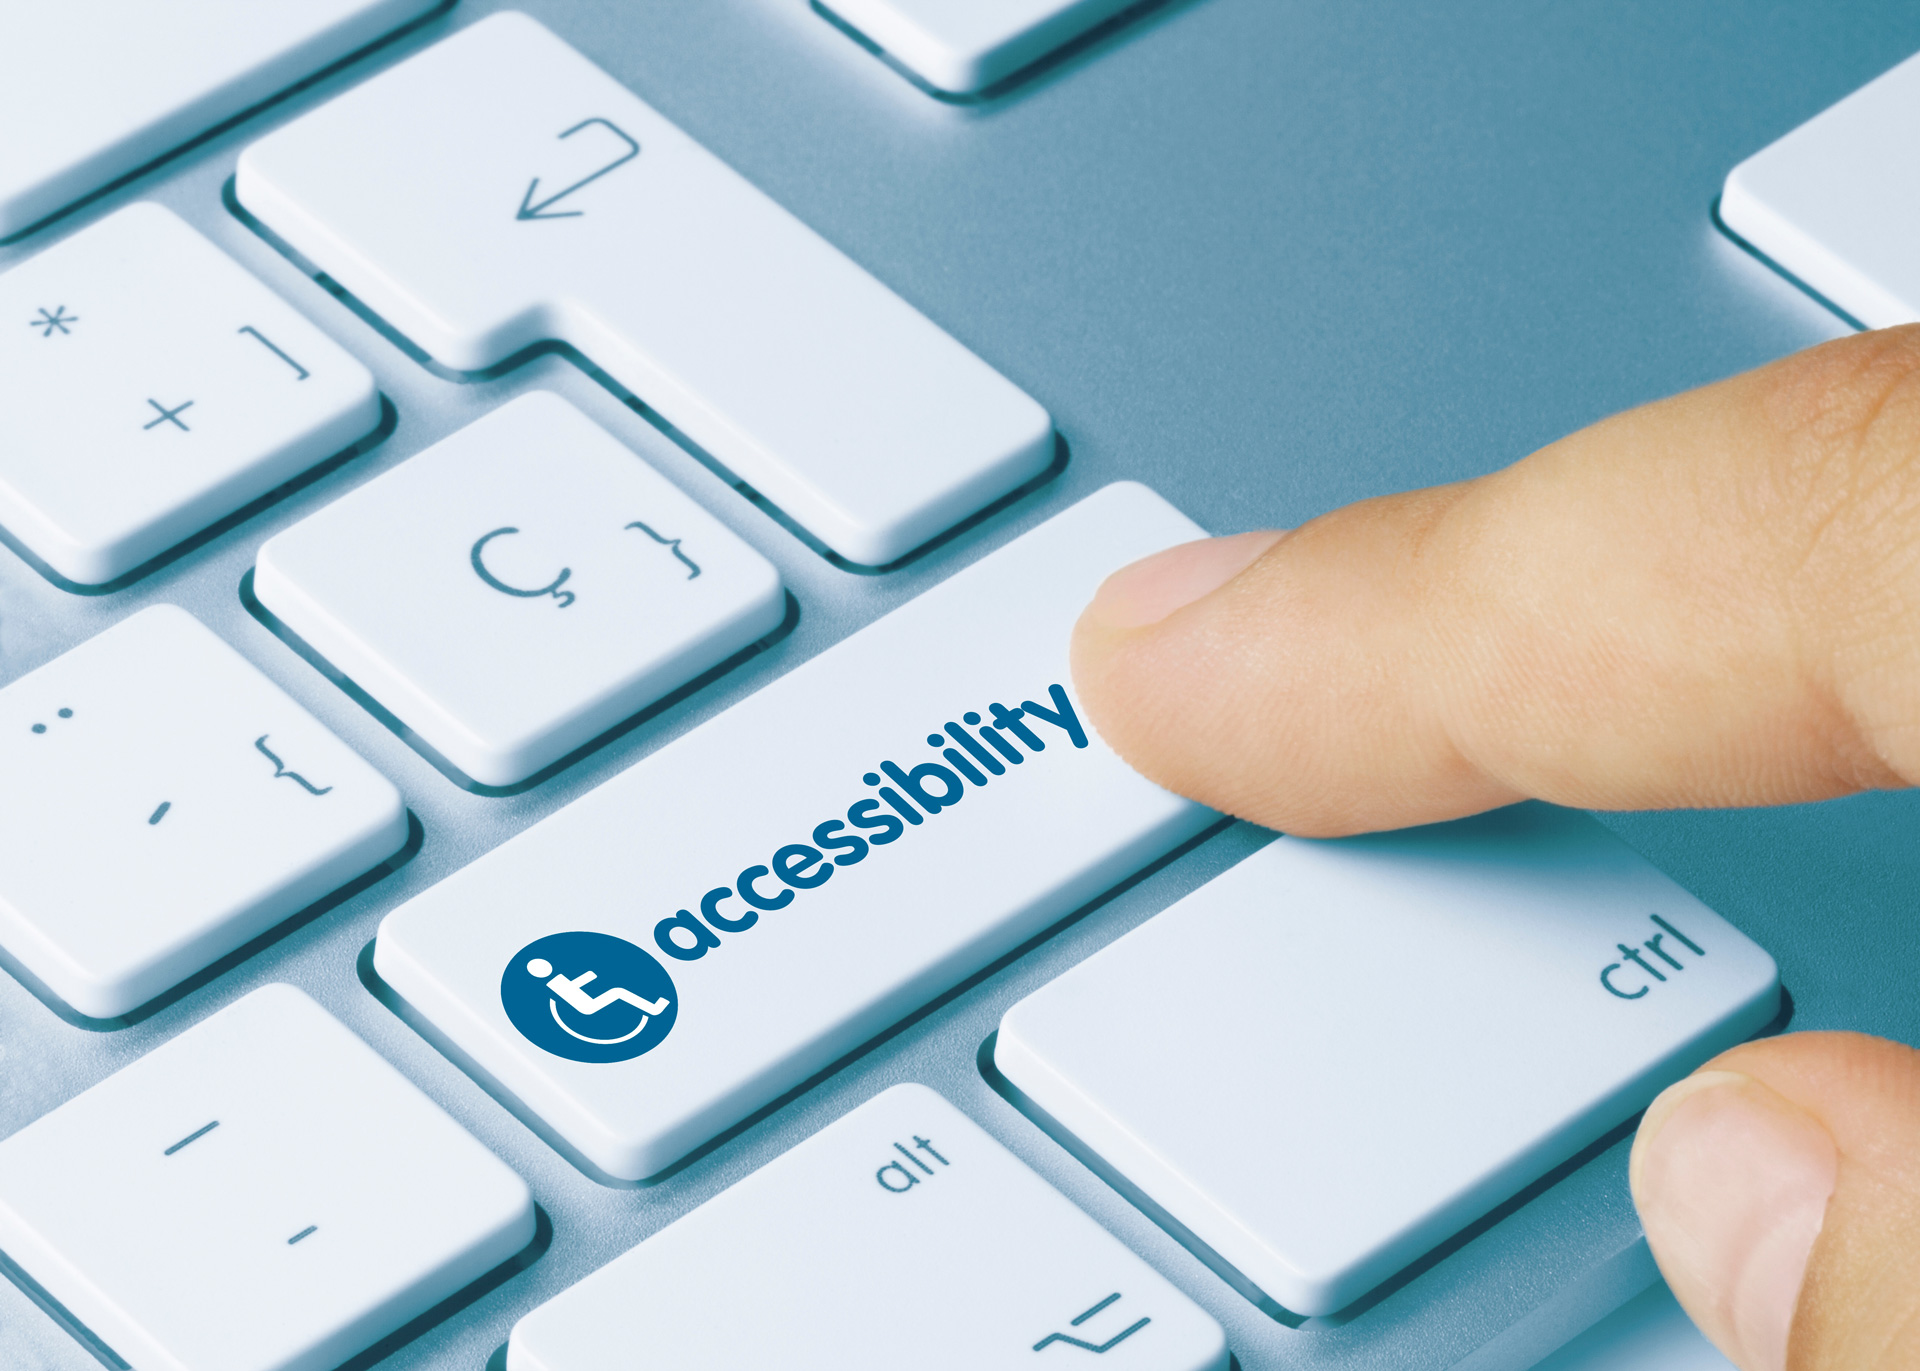 person's finger clicking button that reads "accessibility" with wheelchair symbol